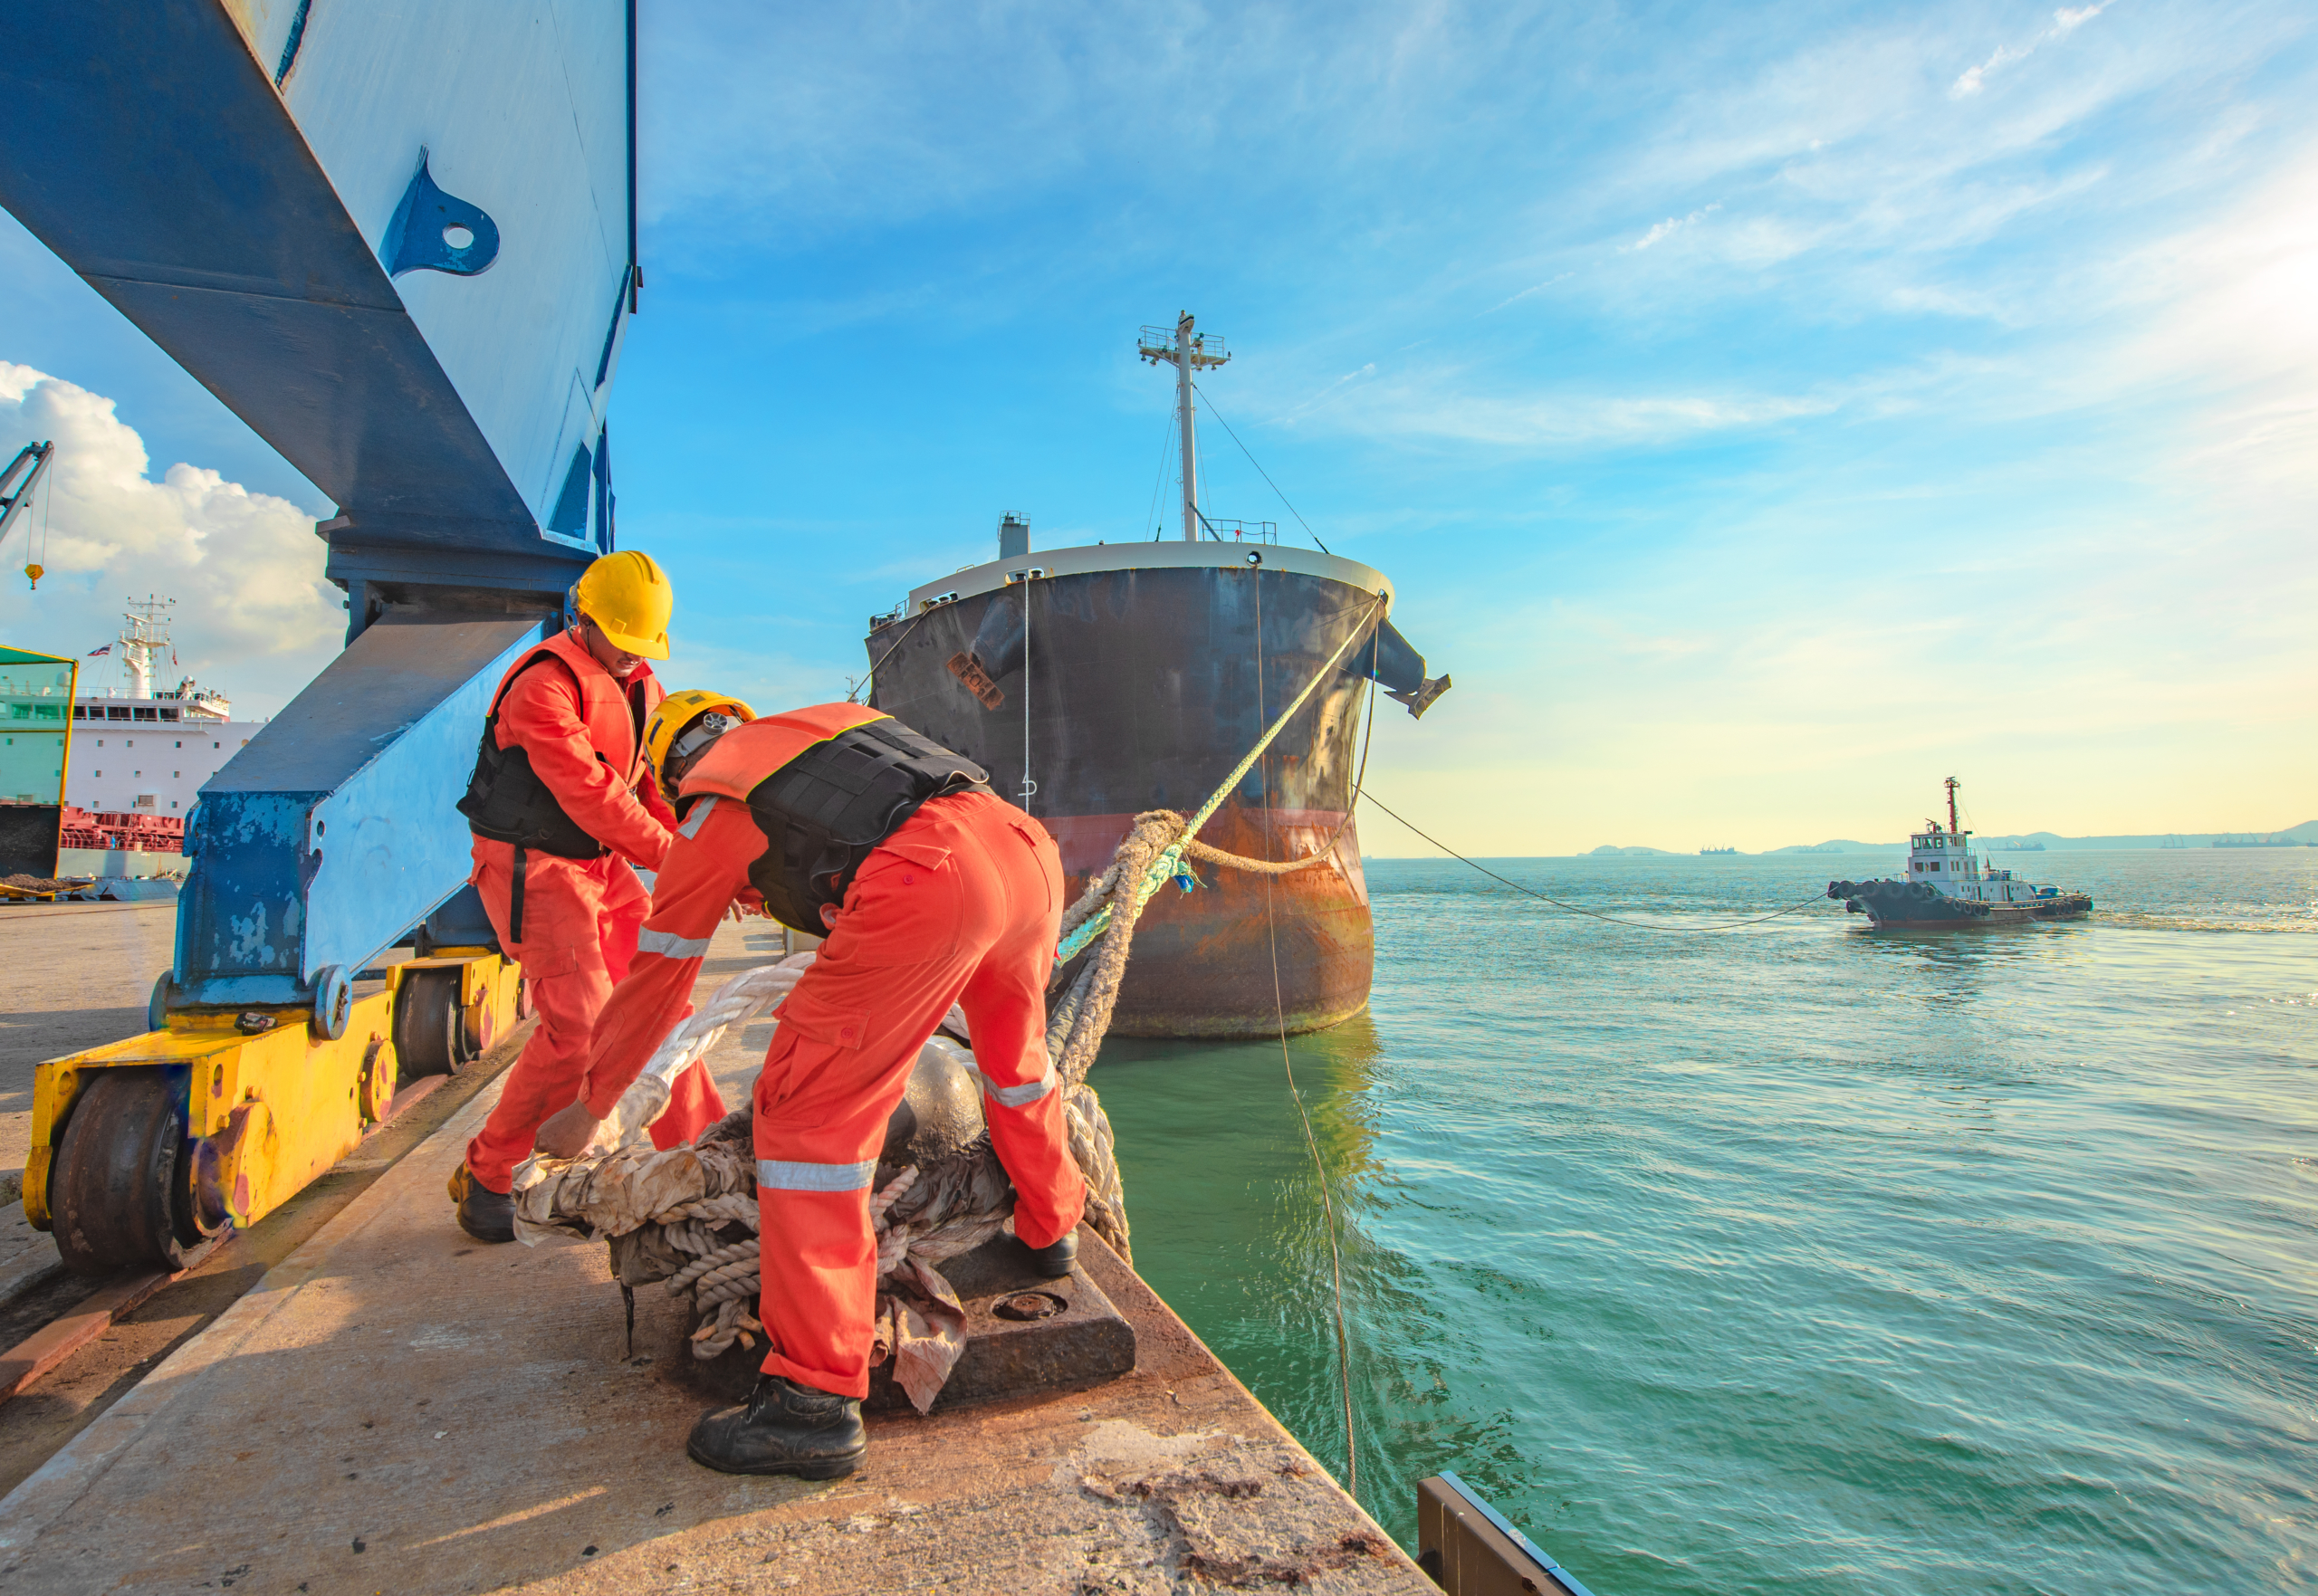 Are Seafarers the Solution to Sustainability?